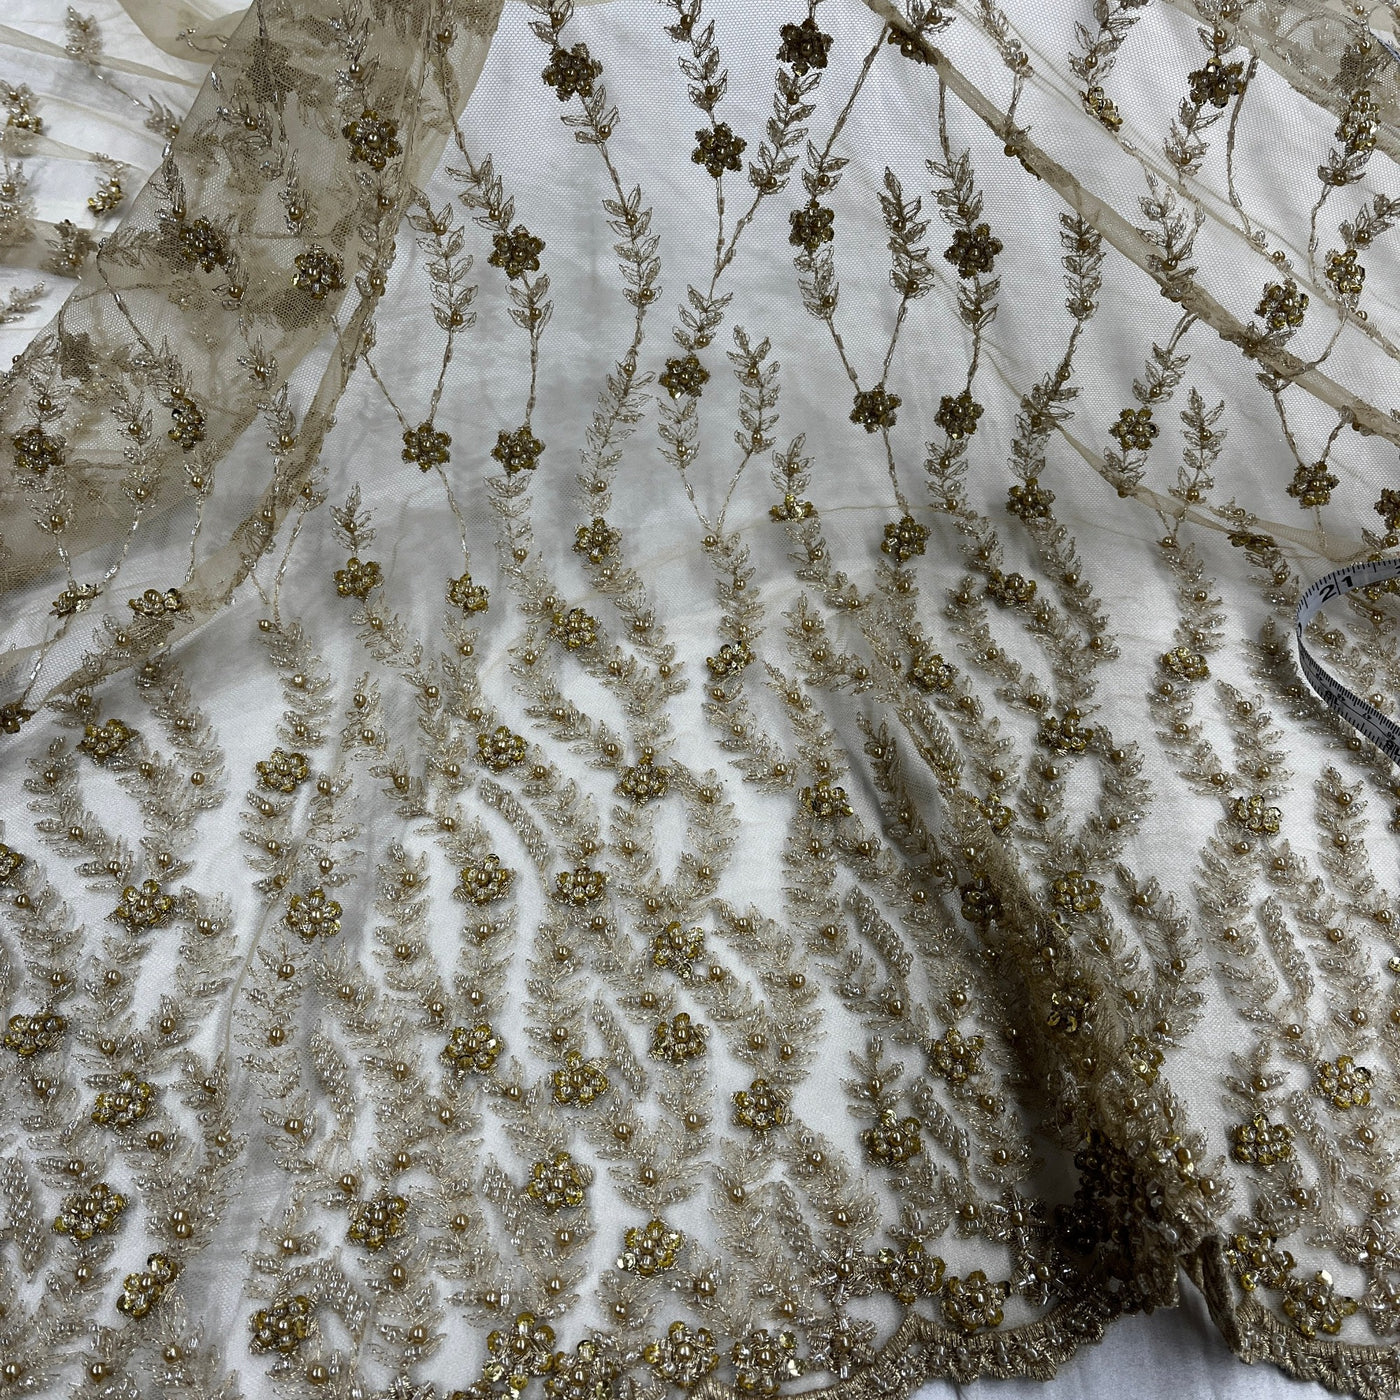 Beaded Lace Fabric Embroidered on 100% Polyester Net Mesh | Lace USA - GD-18613 Gold